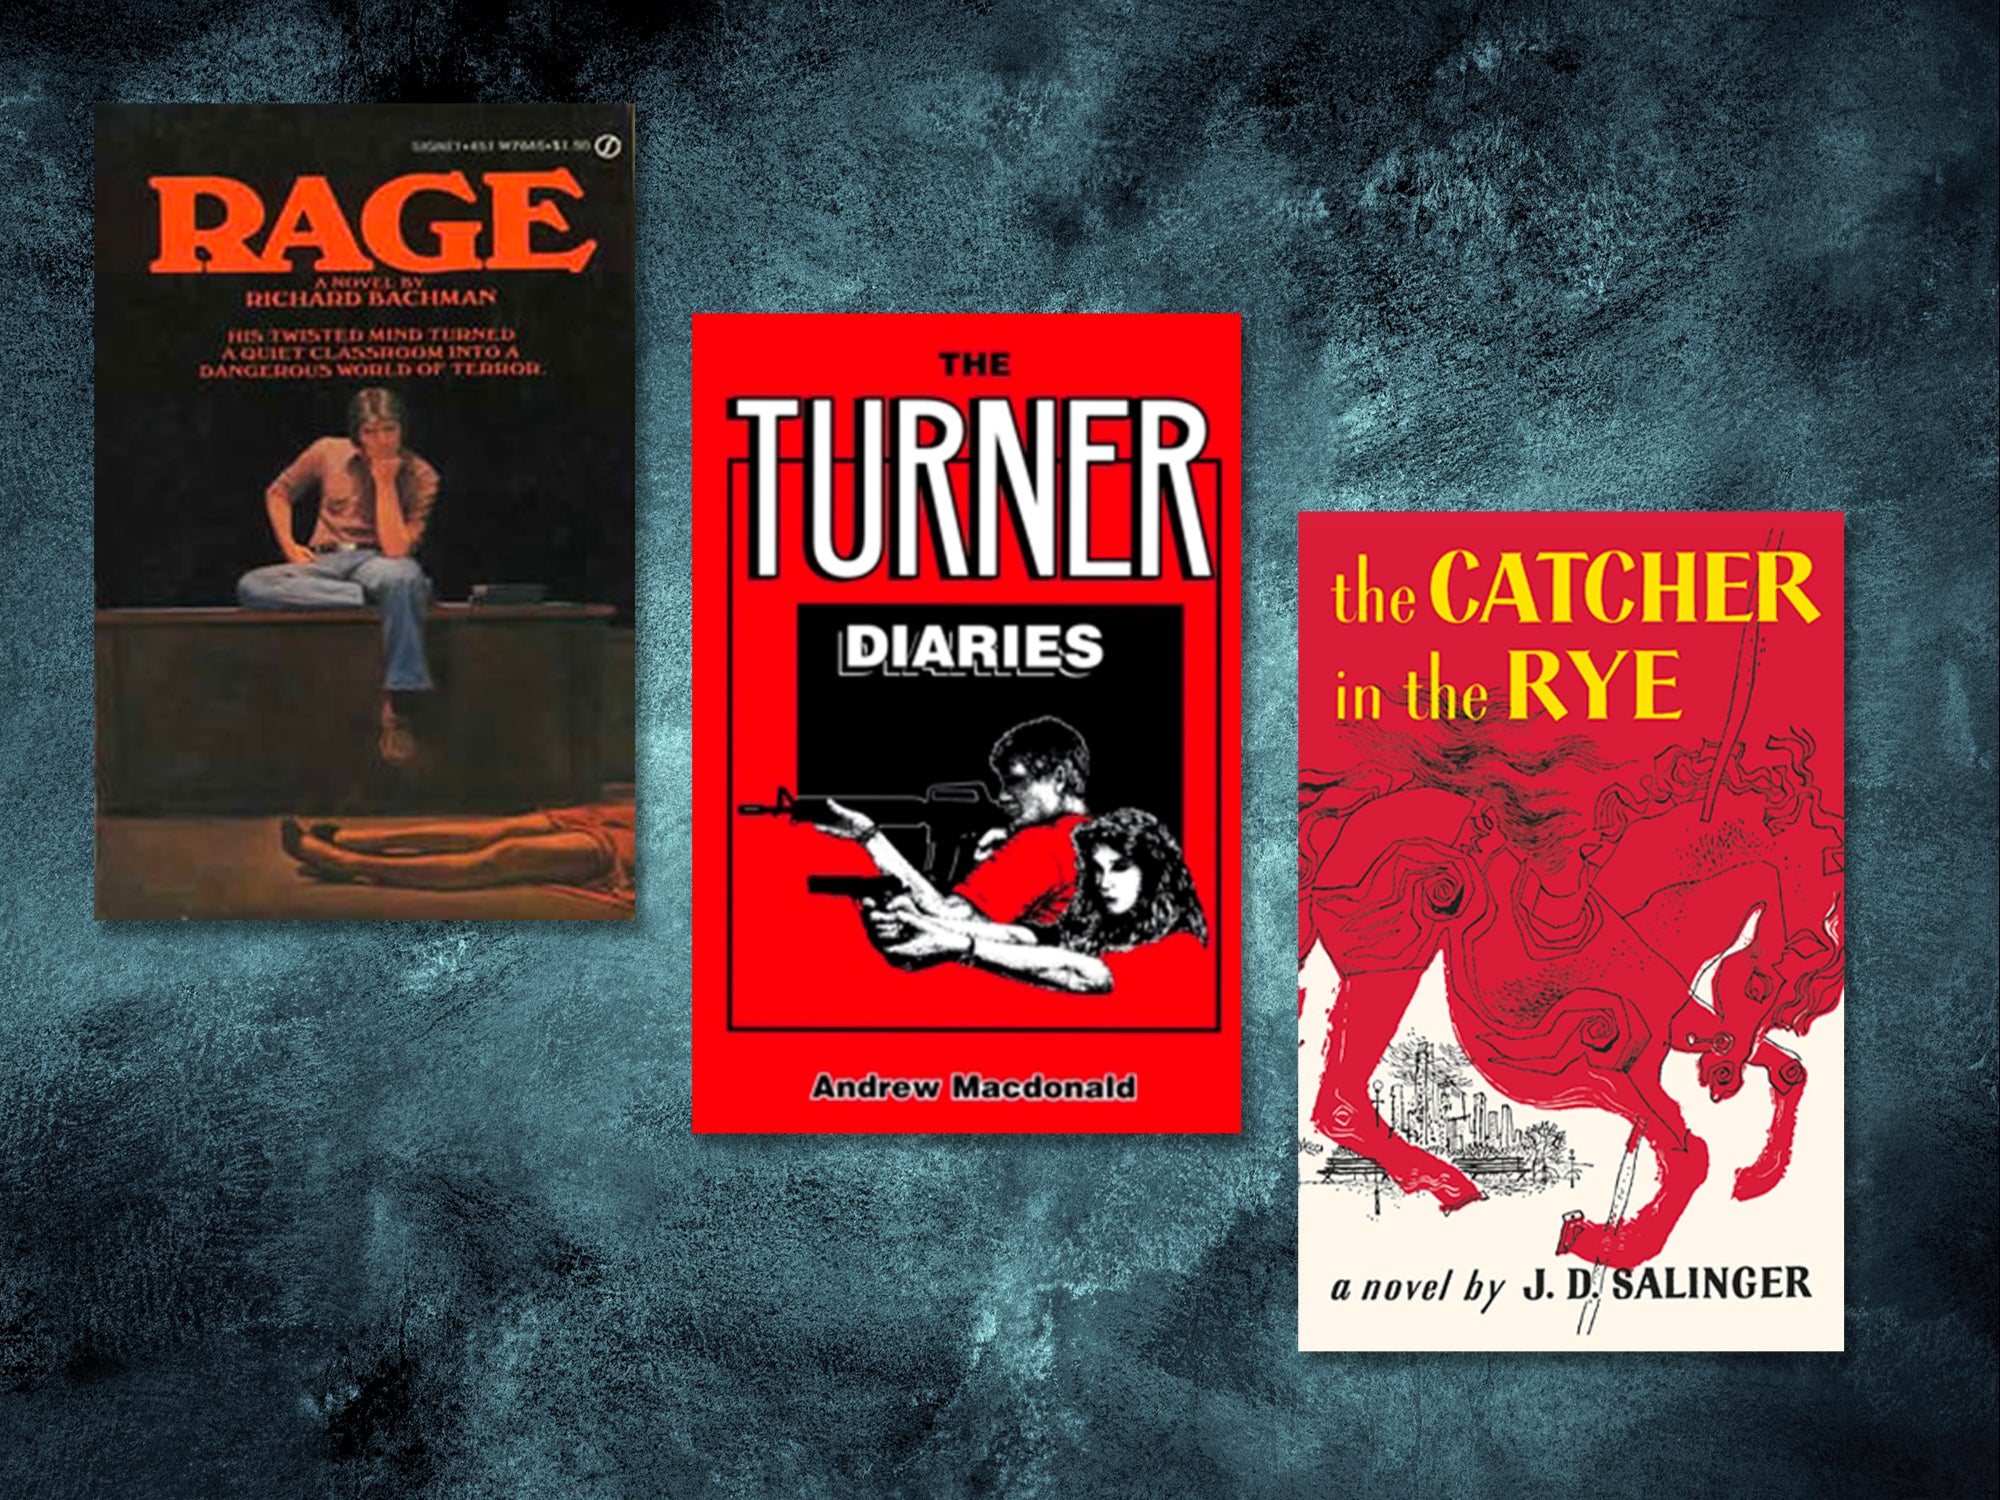 Stephen King’s Rage (published under the pseudonym Richard Bachman), William Luther Pierce’s The Turner Diaries (published under the pseudonym Andrew Macdonald), and JD Salinger’s The Catcher in the Rye